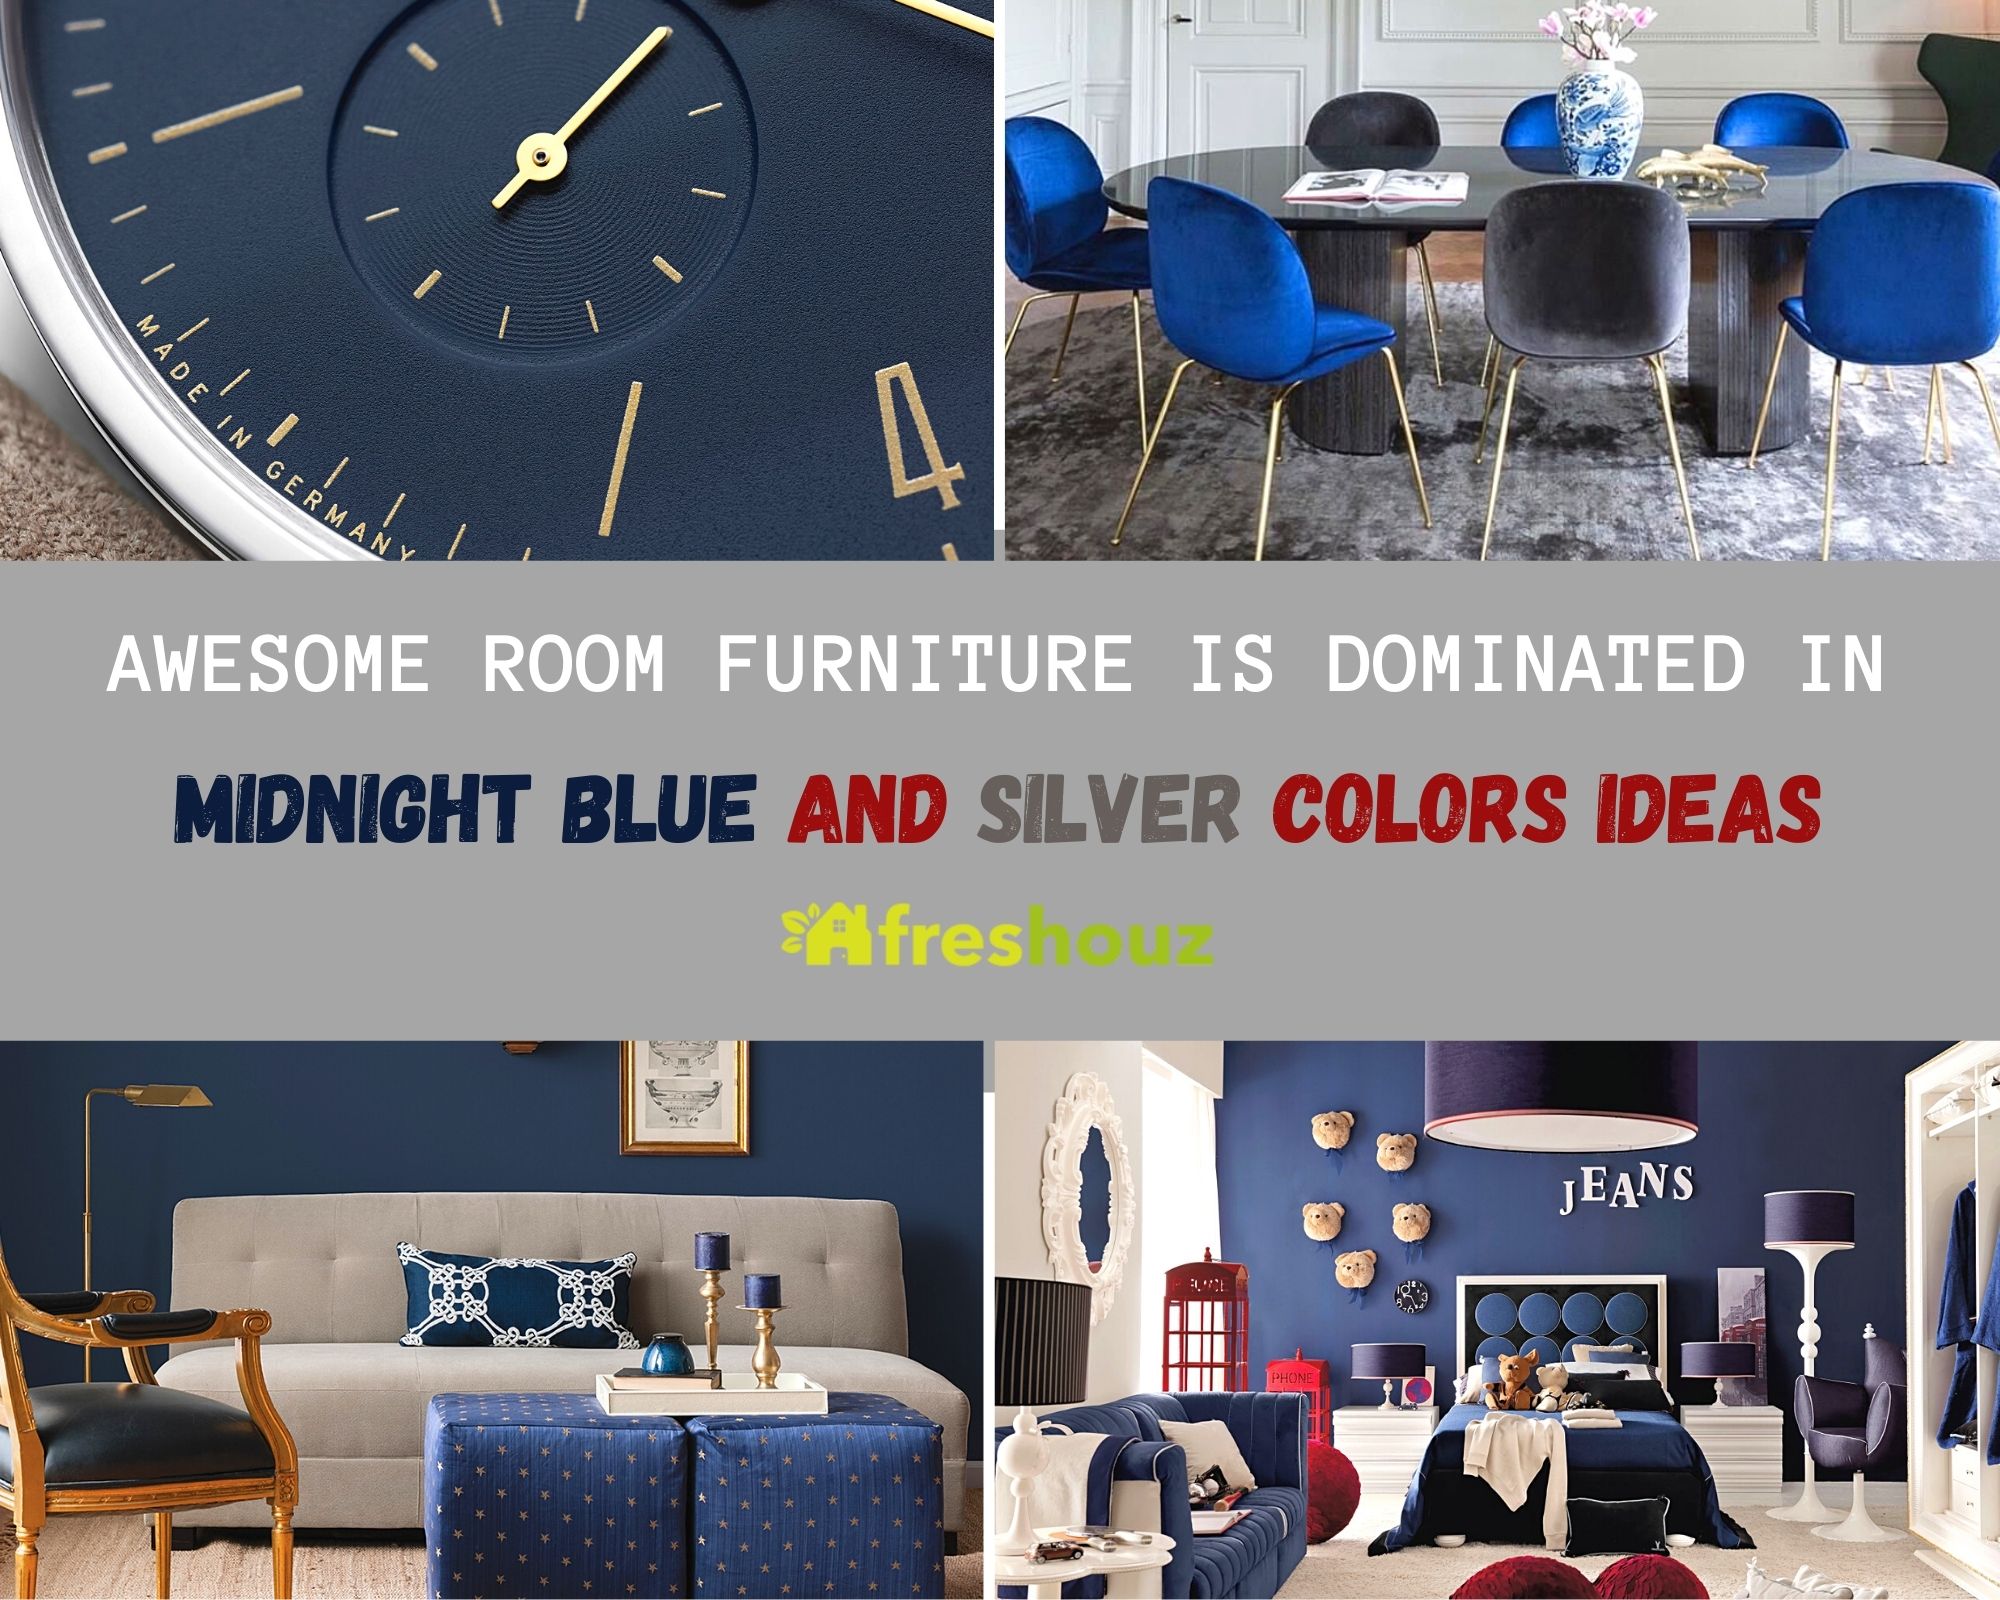 Awesome Room Furniture Is Dominated In Midnight Blue And Silver Colors Ideas